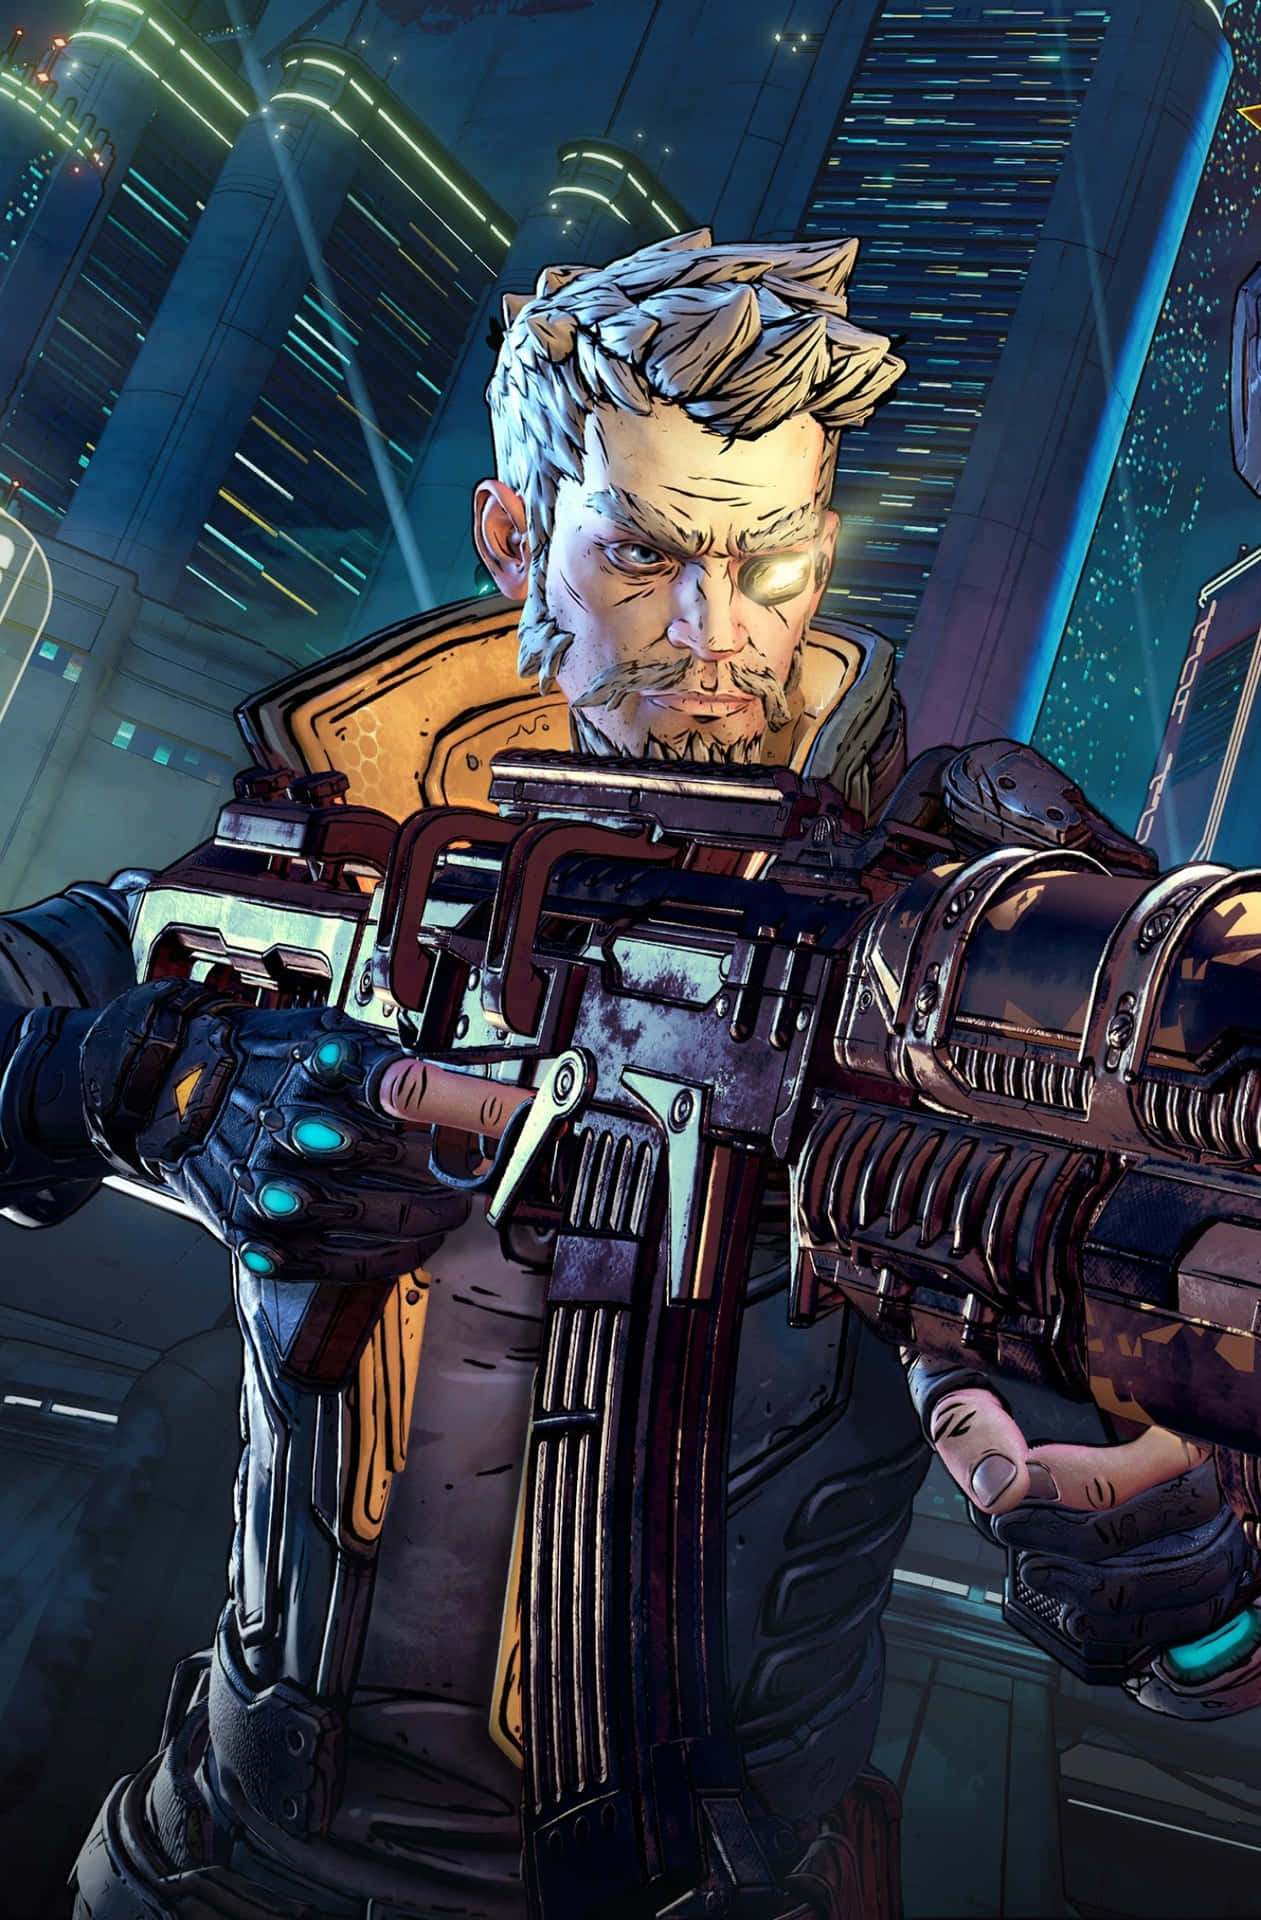 Experience the online mayhem of Borderlands 3 with the Google Pixel 3XL